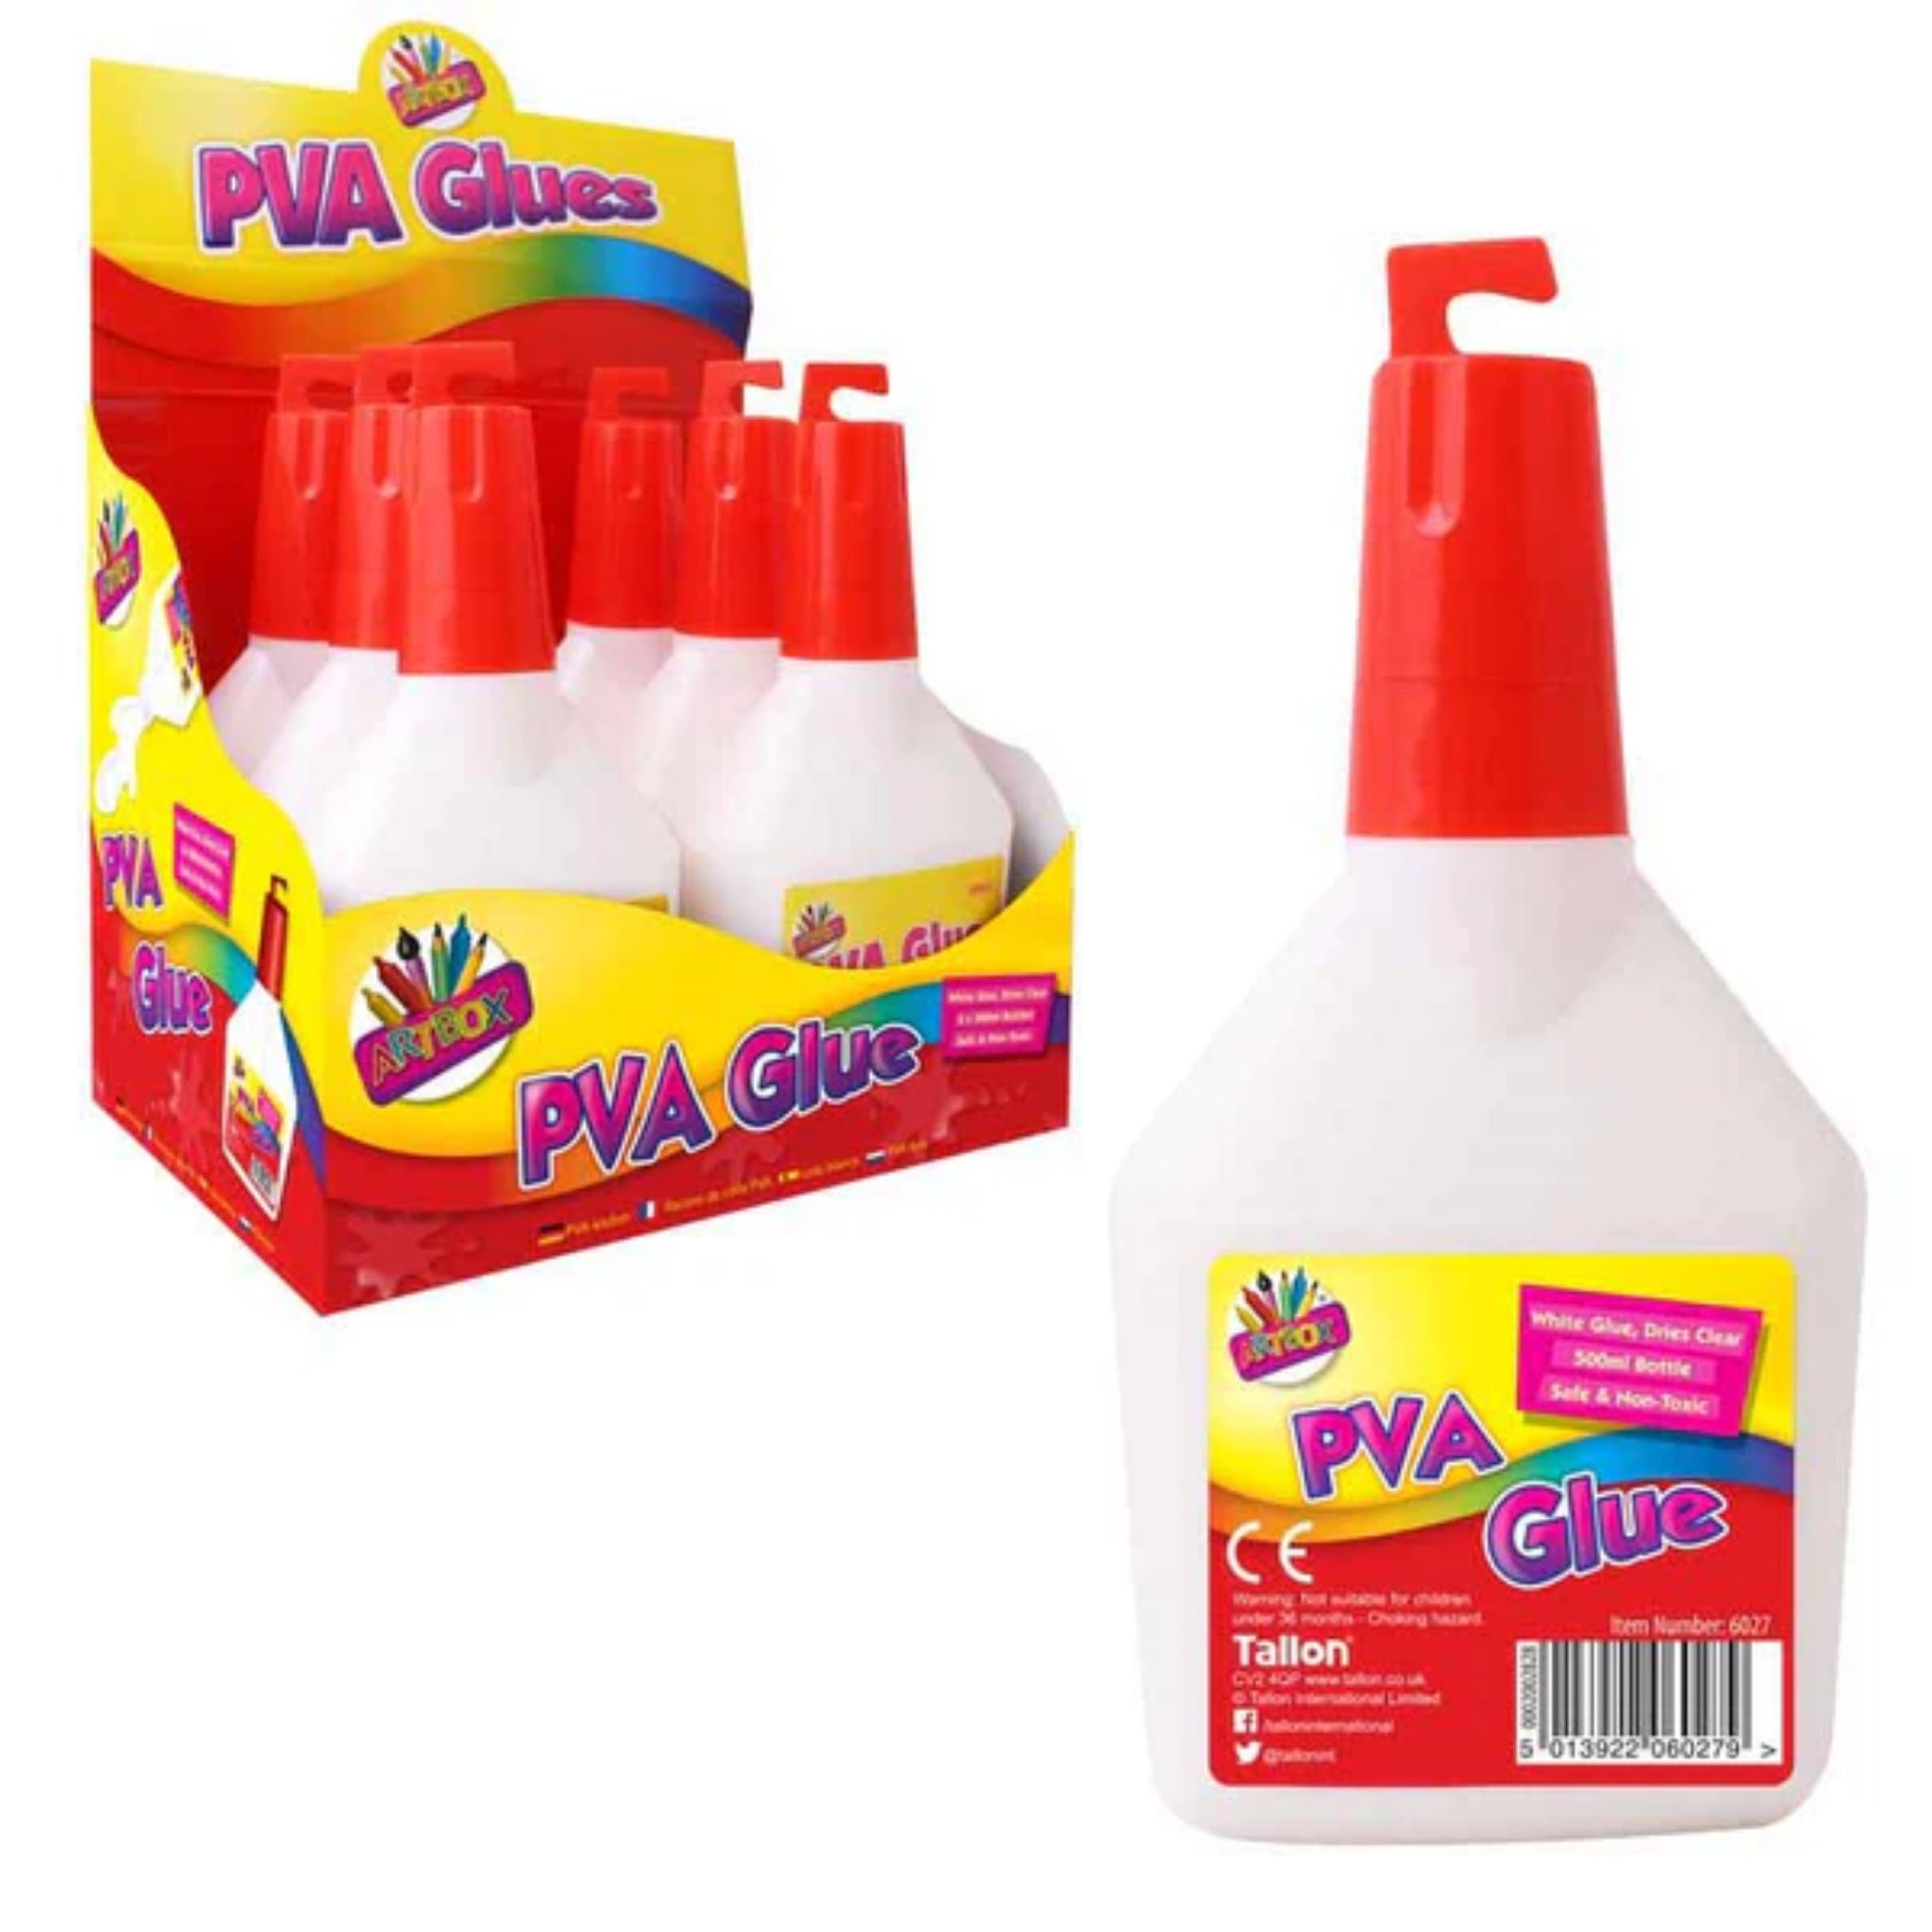 Any chance this will work in lieu of PVA glue? Found it in my kid's craft  bin and figured I'd save myself a few bucks if I can. Trying to add gravel